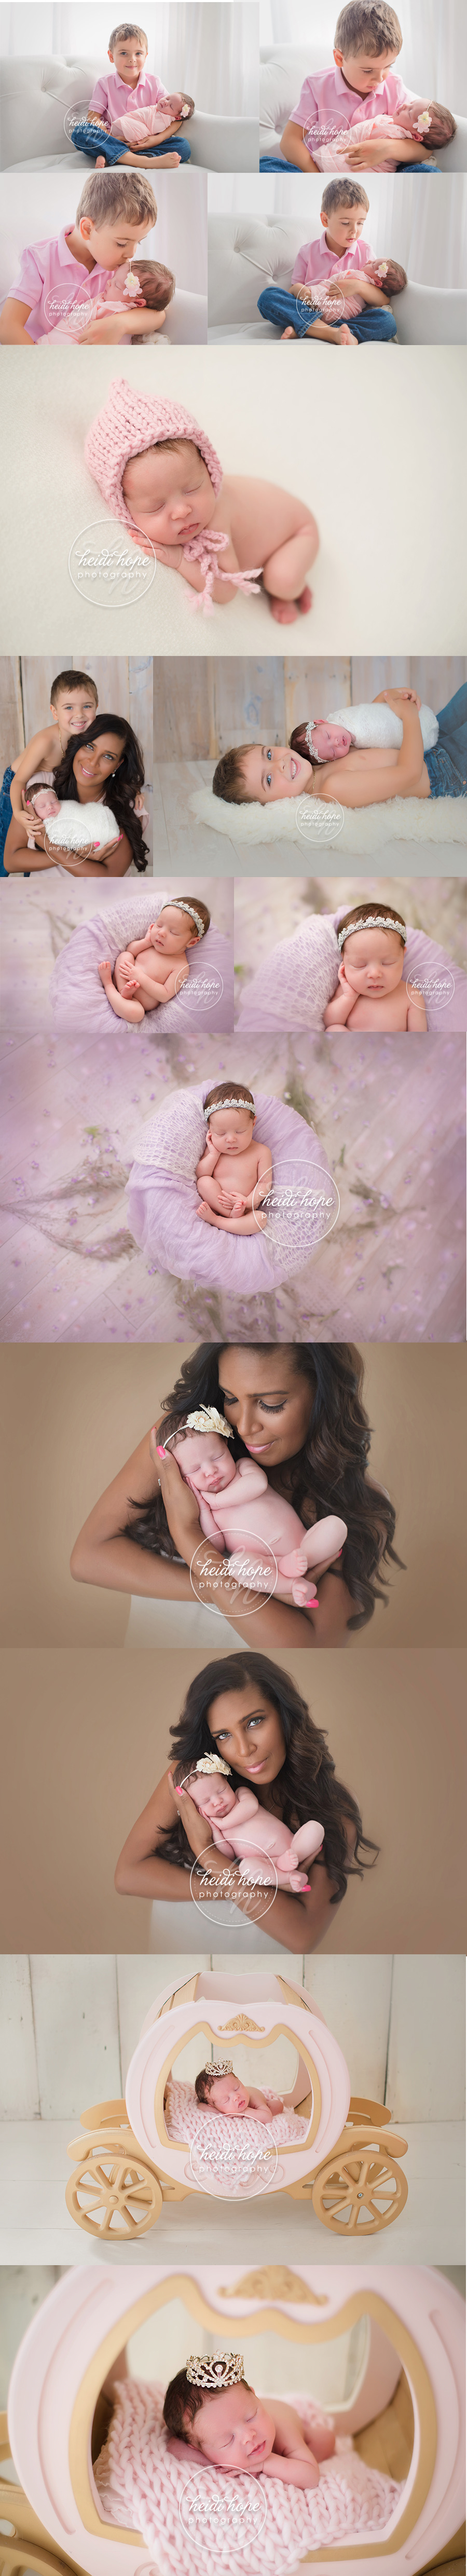 newborn-baby-girl-with-big-brother-and-mom-in-a-girly-princess-portrait-session-by-newborn-photographer-heidi-hope